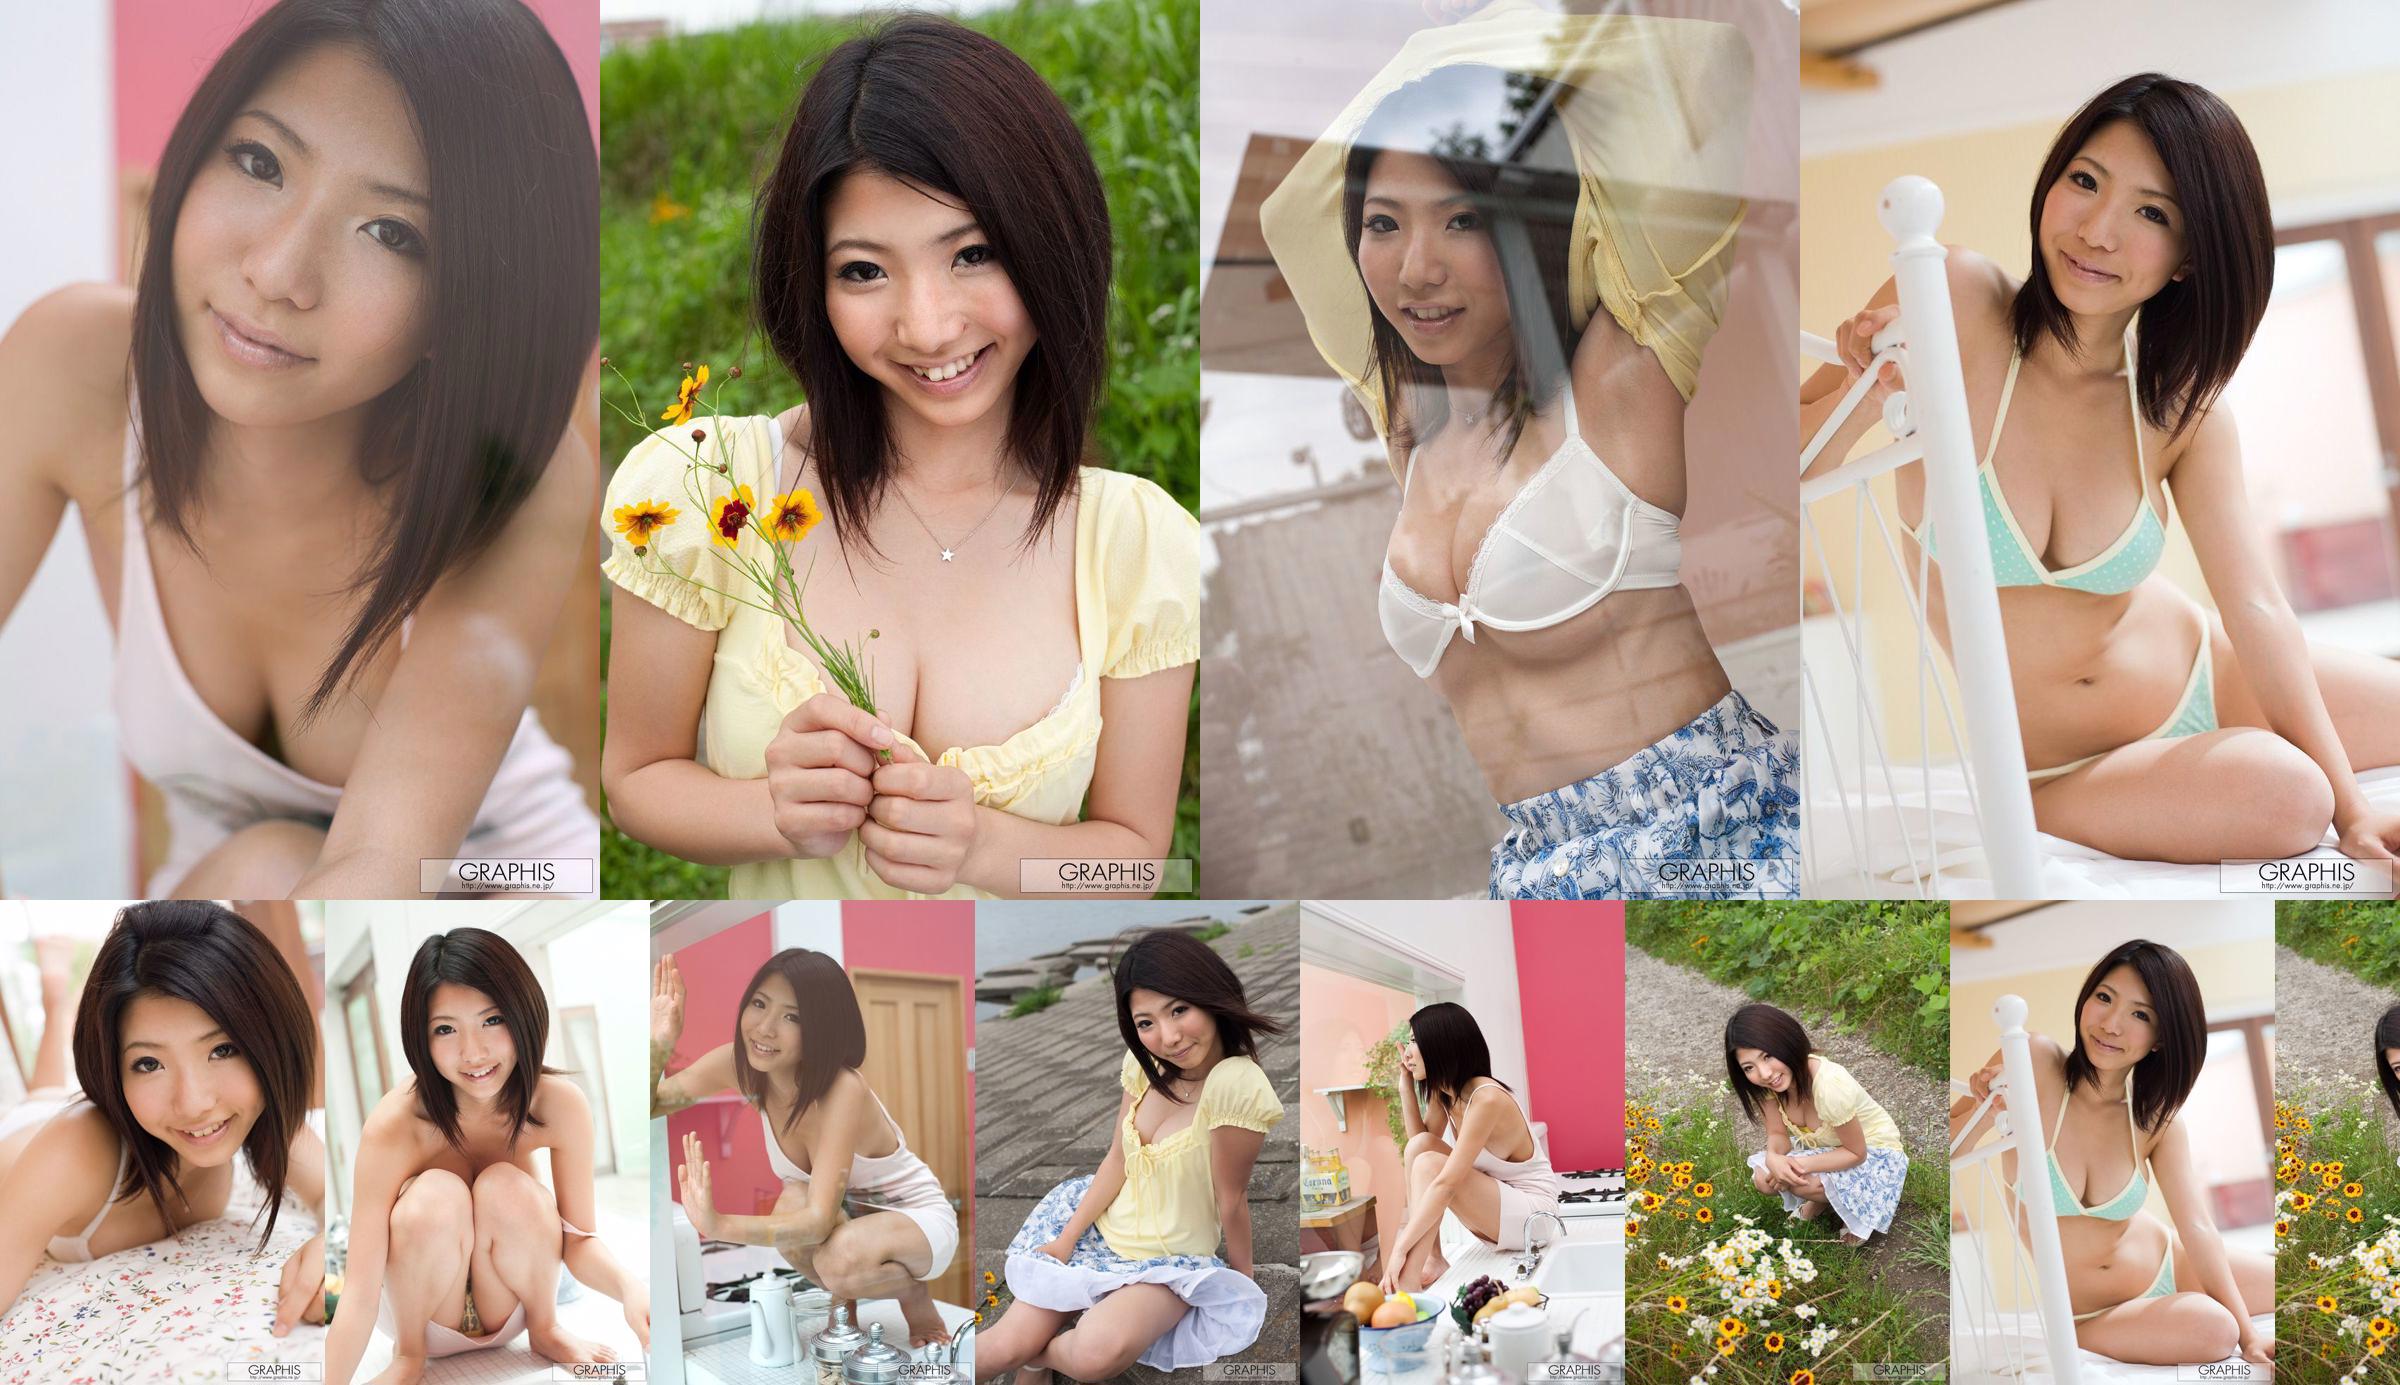 An アン《Simple and Innocent》 [Graphis] Gals No.82b69e ページ11